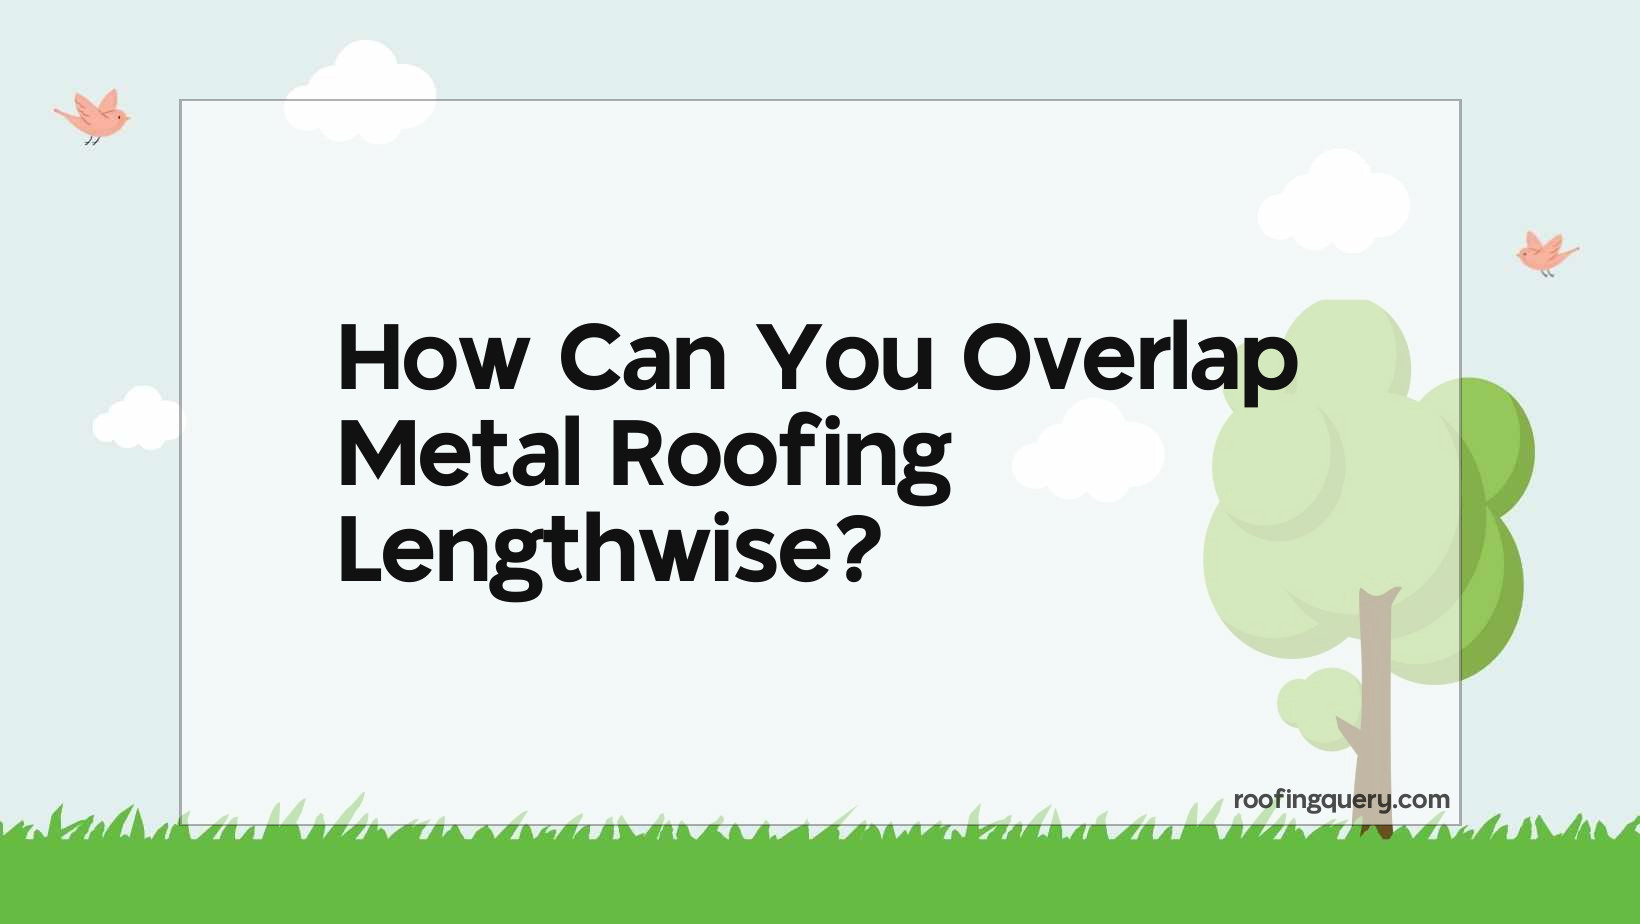 Can You Overlap Metal Roofing Lengthwise